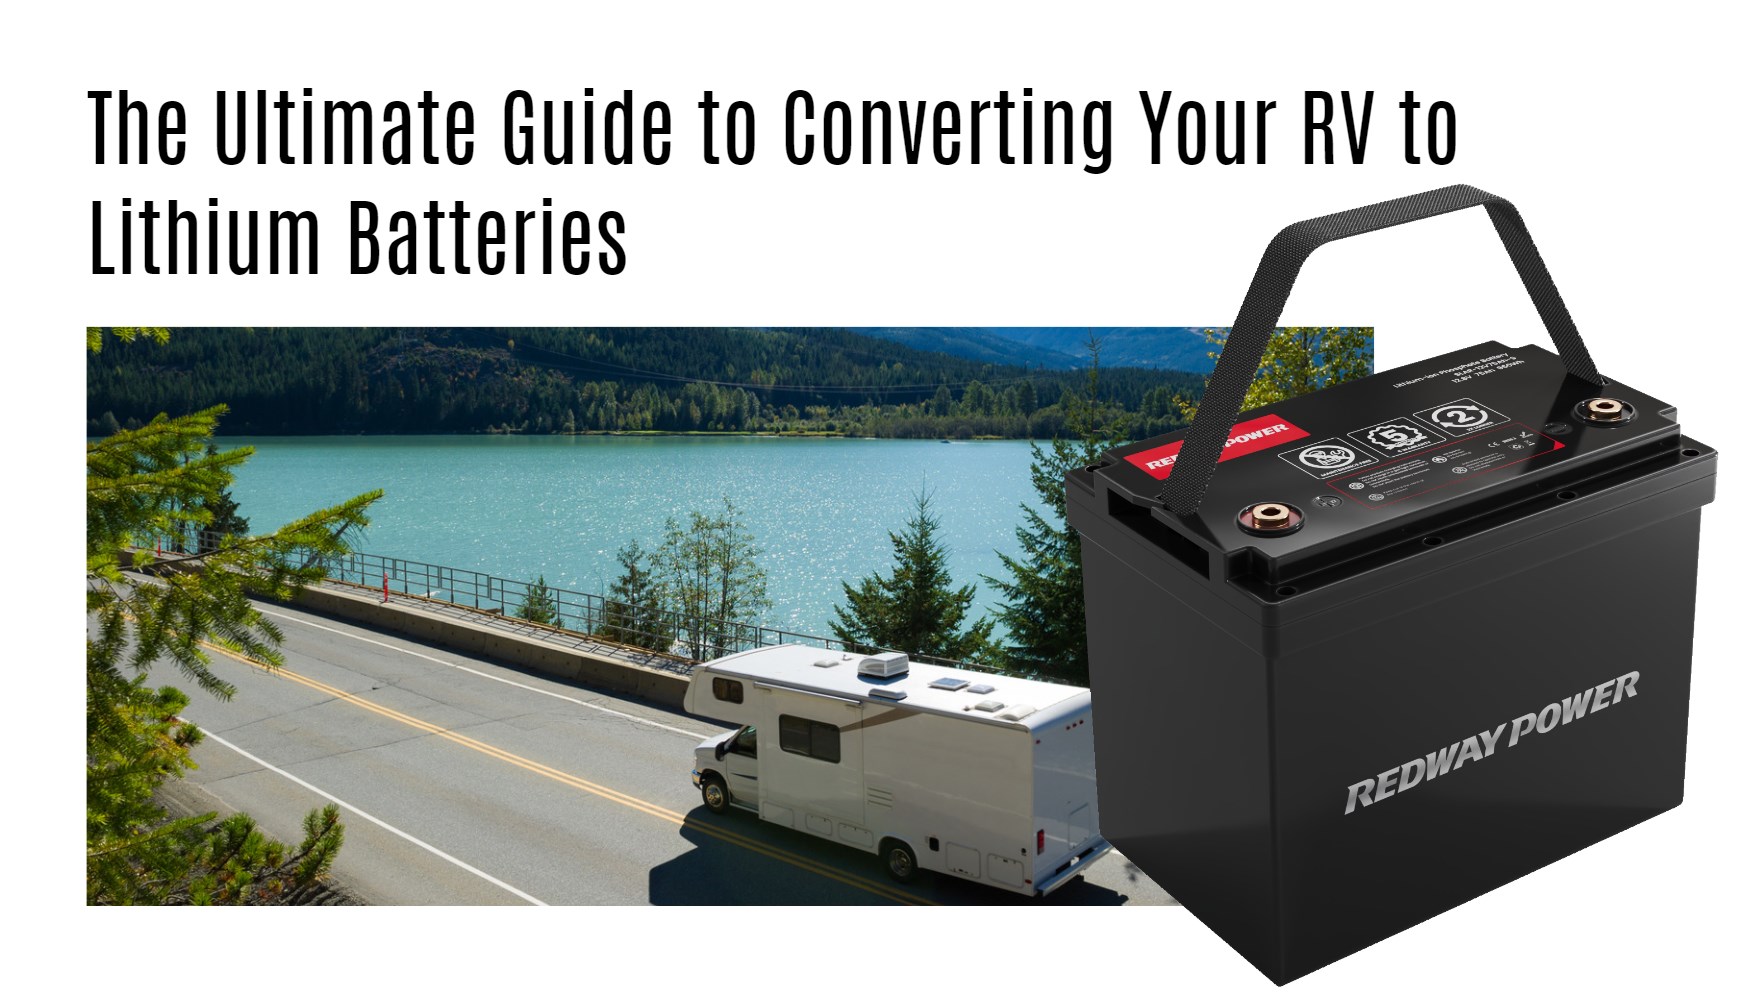 The Ultimate Guide to Converting Your RV to Lithium Batteries